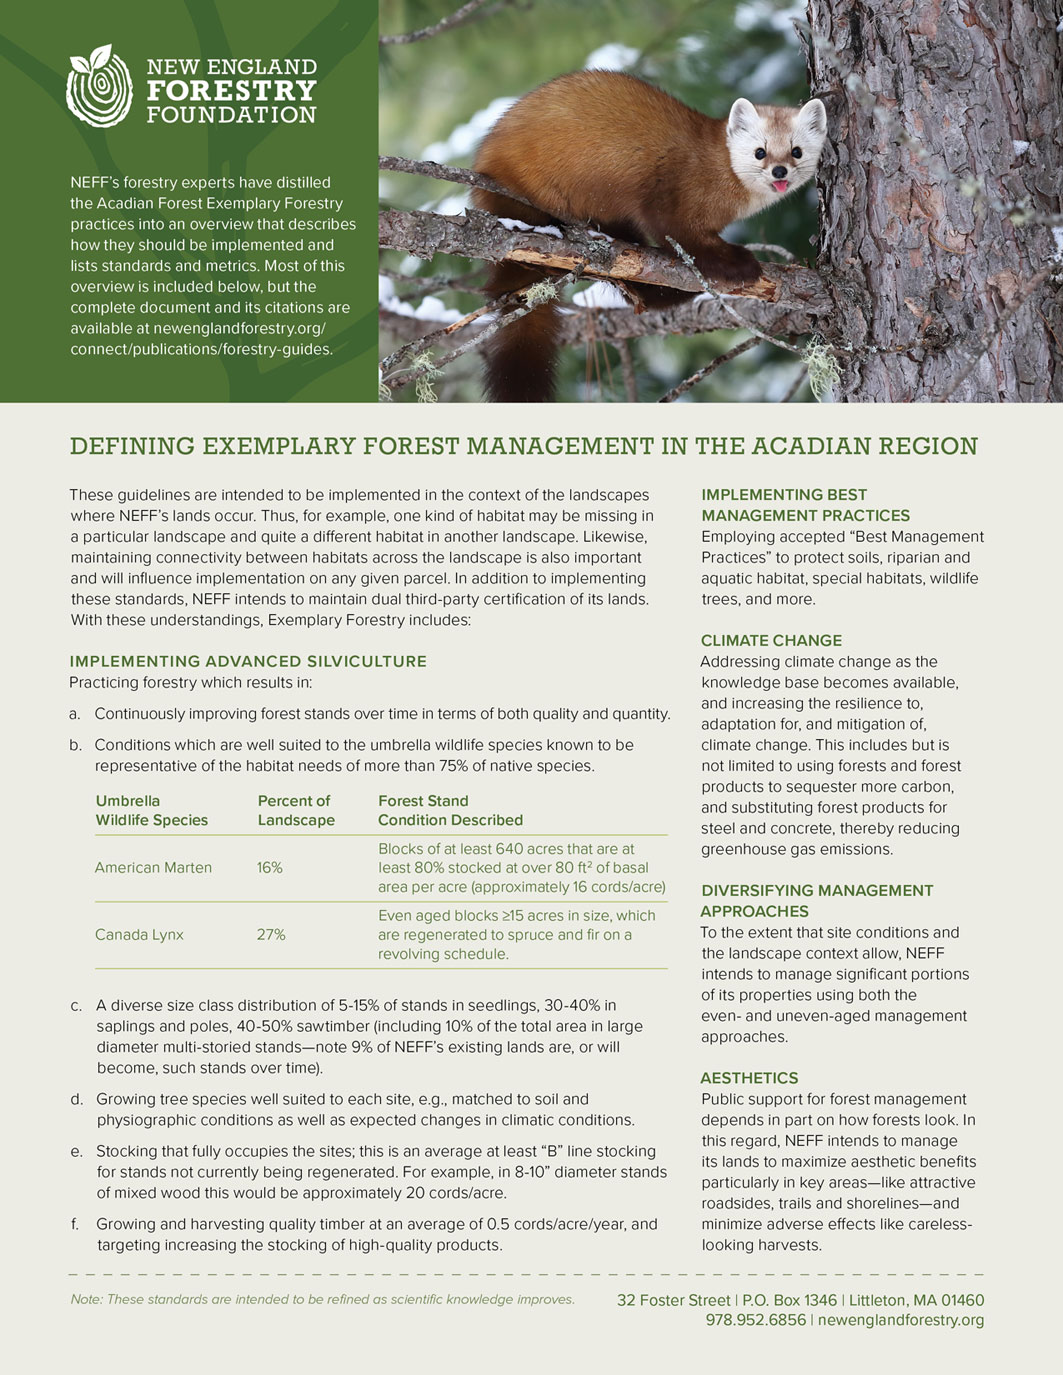 One-page handout that provides an overview of Exemplary Forestry practices